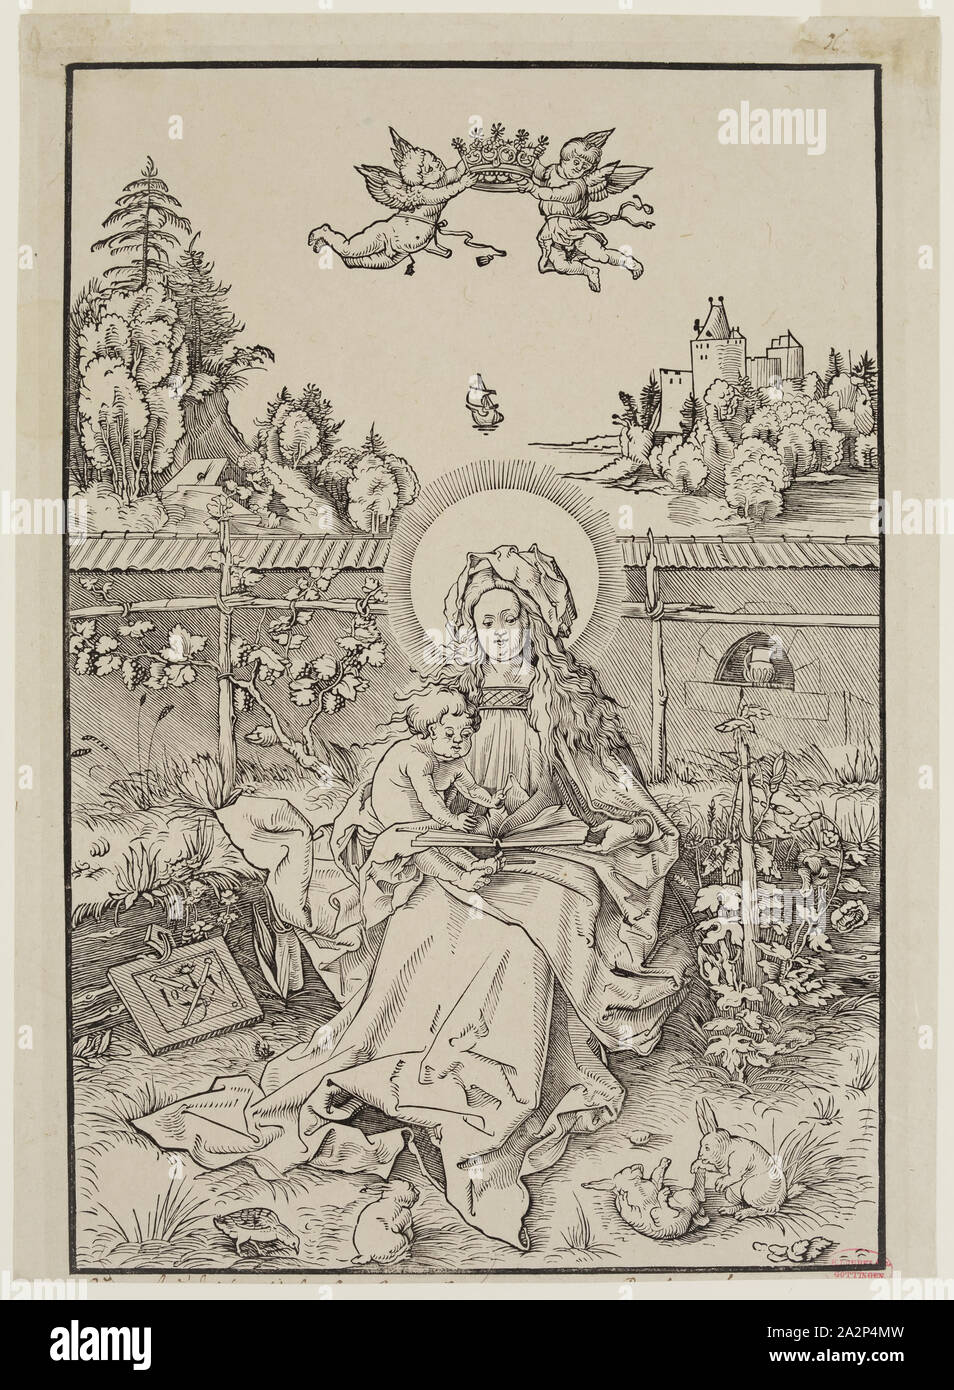 Heinrich Lodel, German, 1798-1861, after Hans Ulrich Wechtlin, The Virgin Sitting in a Garden, 19th century, woodcut printed in gray ink on china paper, Image: 10 3/8 × 7 1/8 inches (26.4 × 18.1 cm Stock Photo